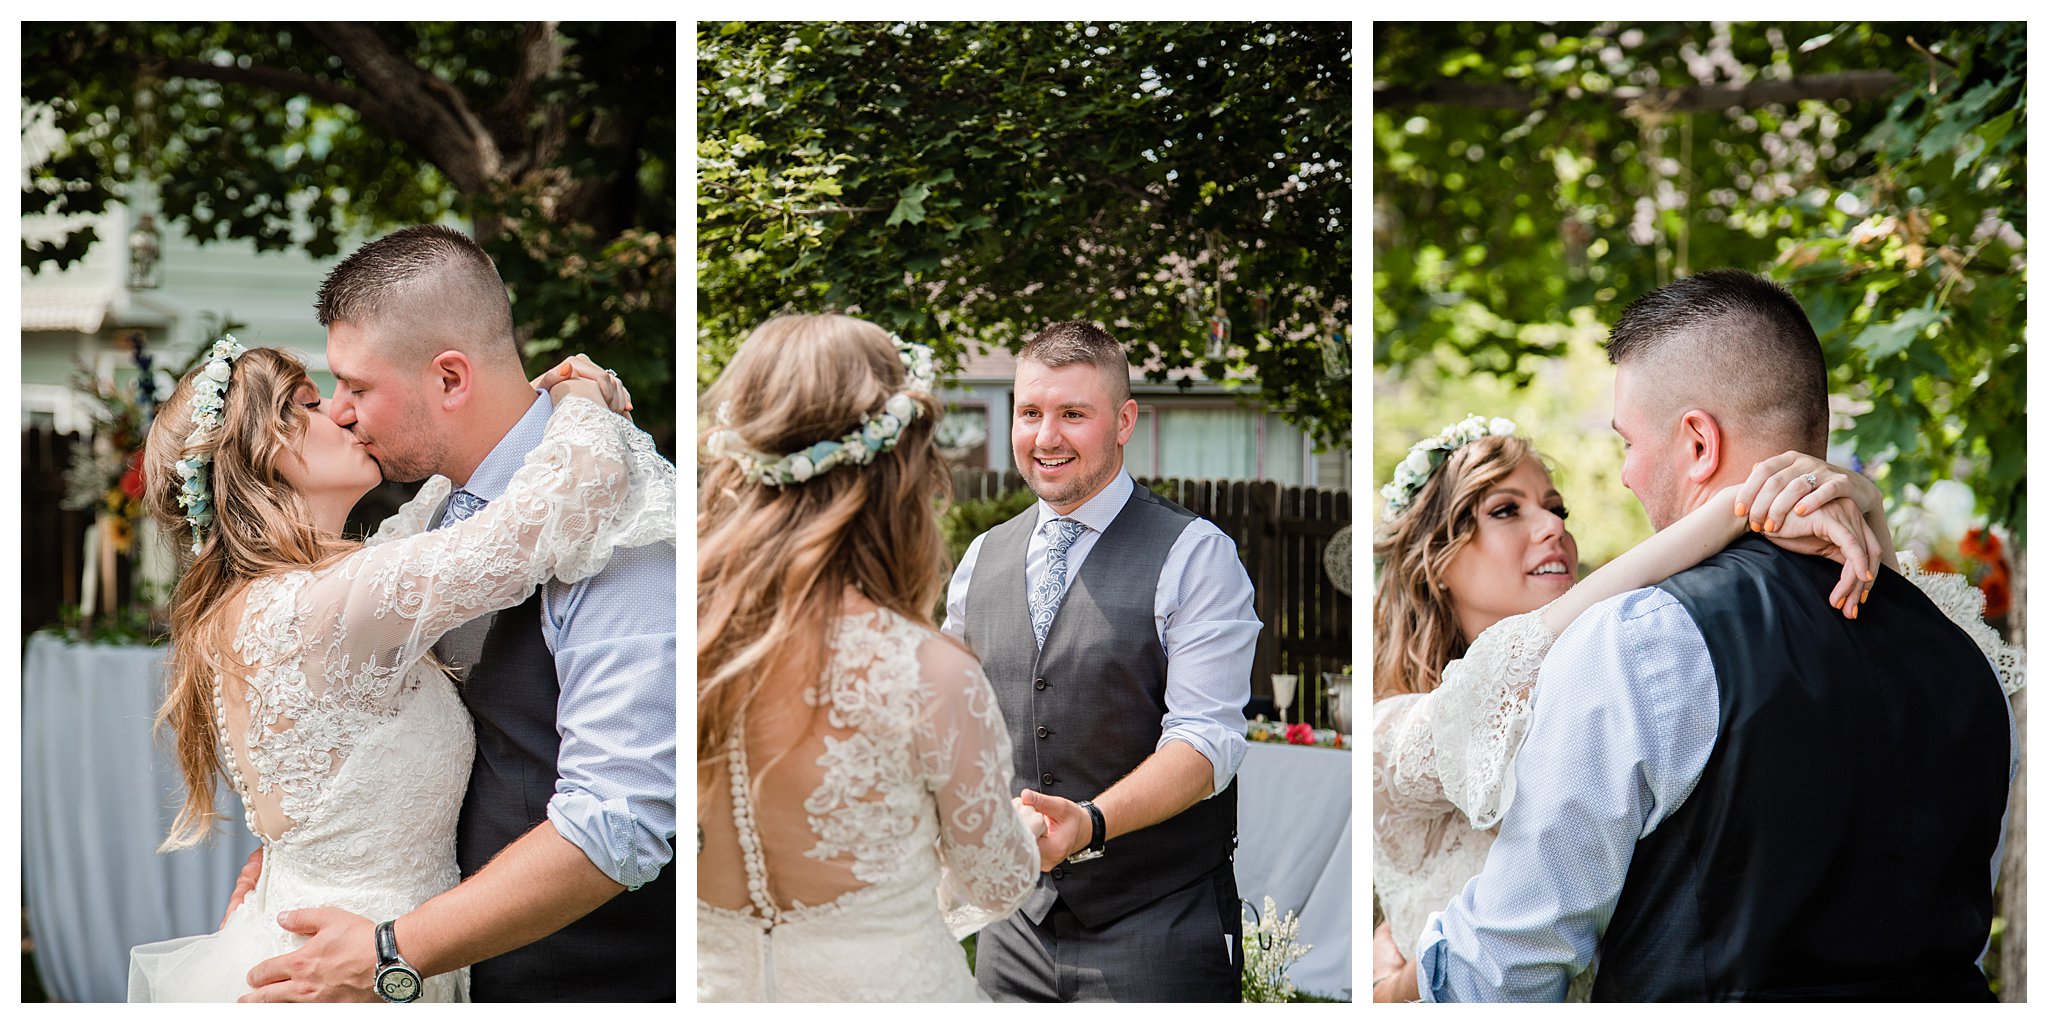 The couple has their first dance during their backyard wedding